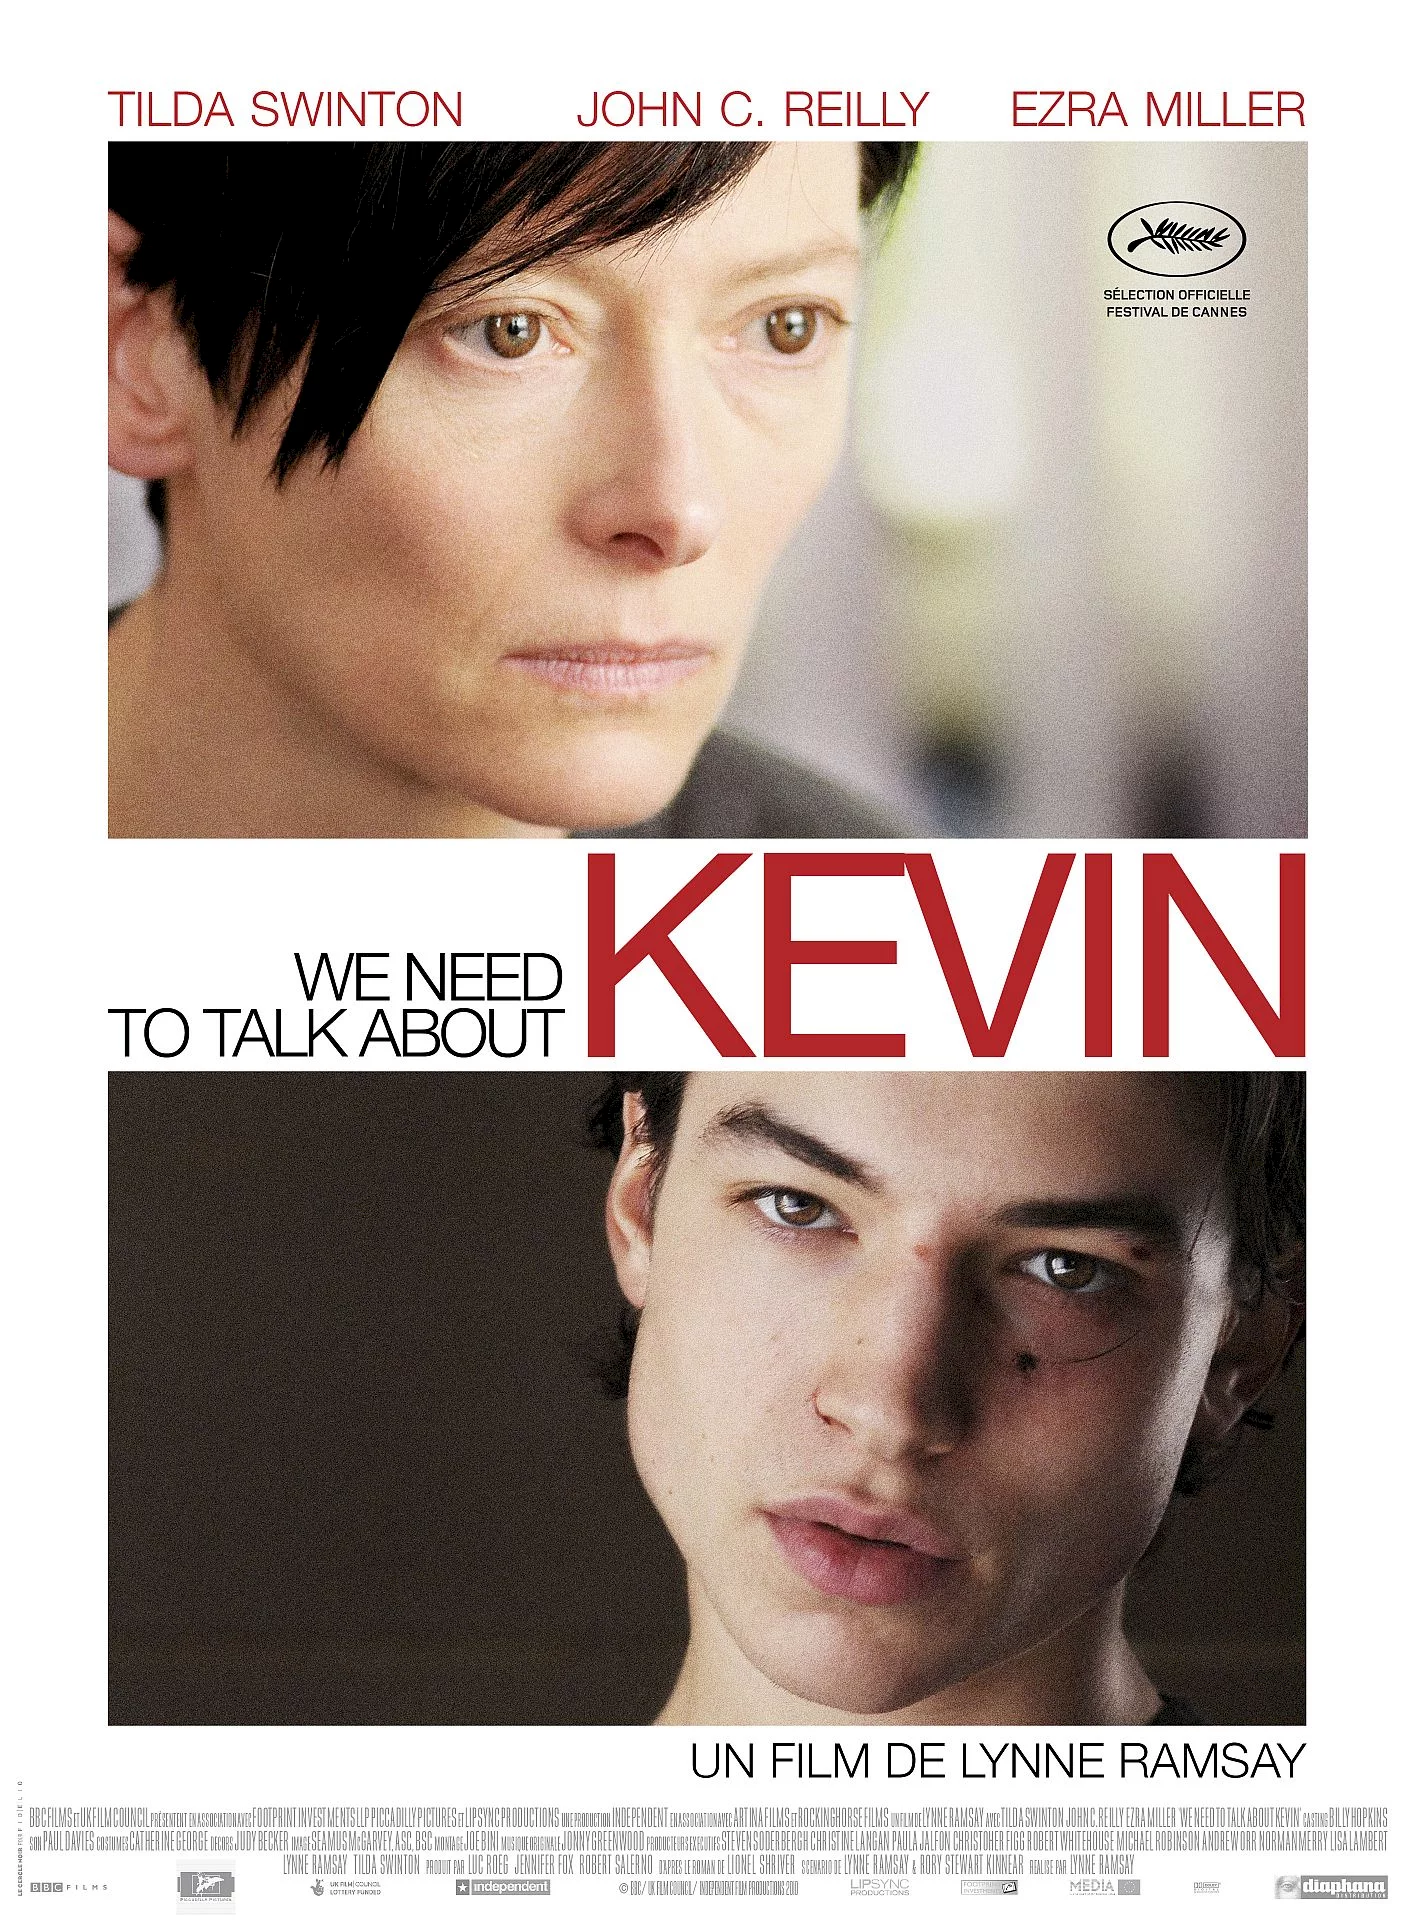 Photo du film : We need to talk about Kevin 